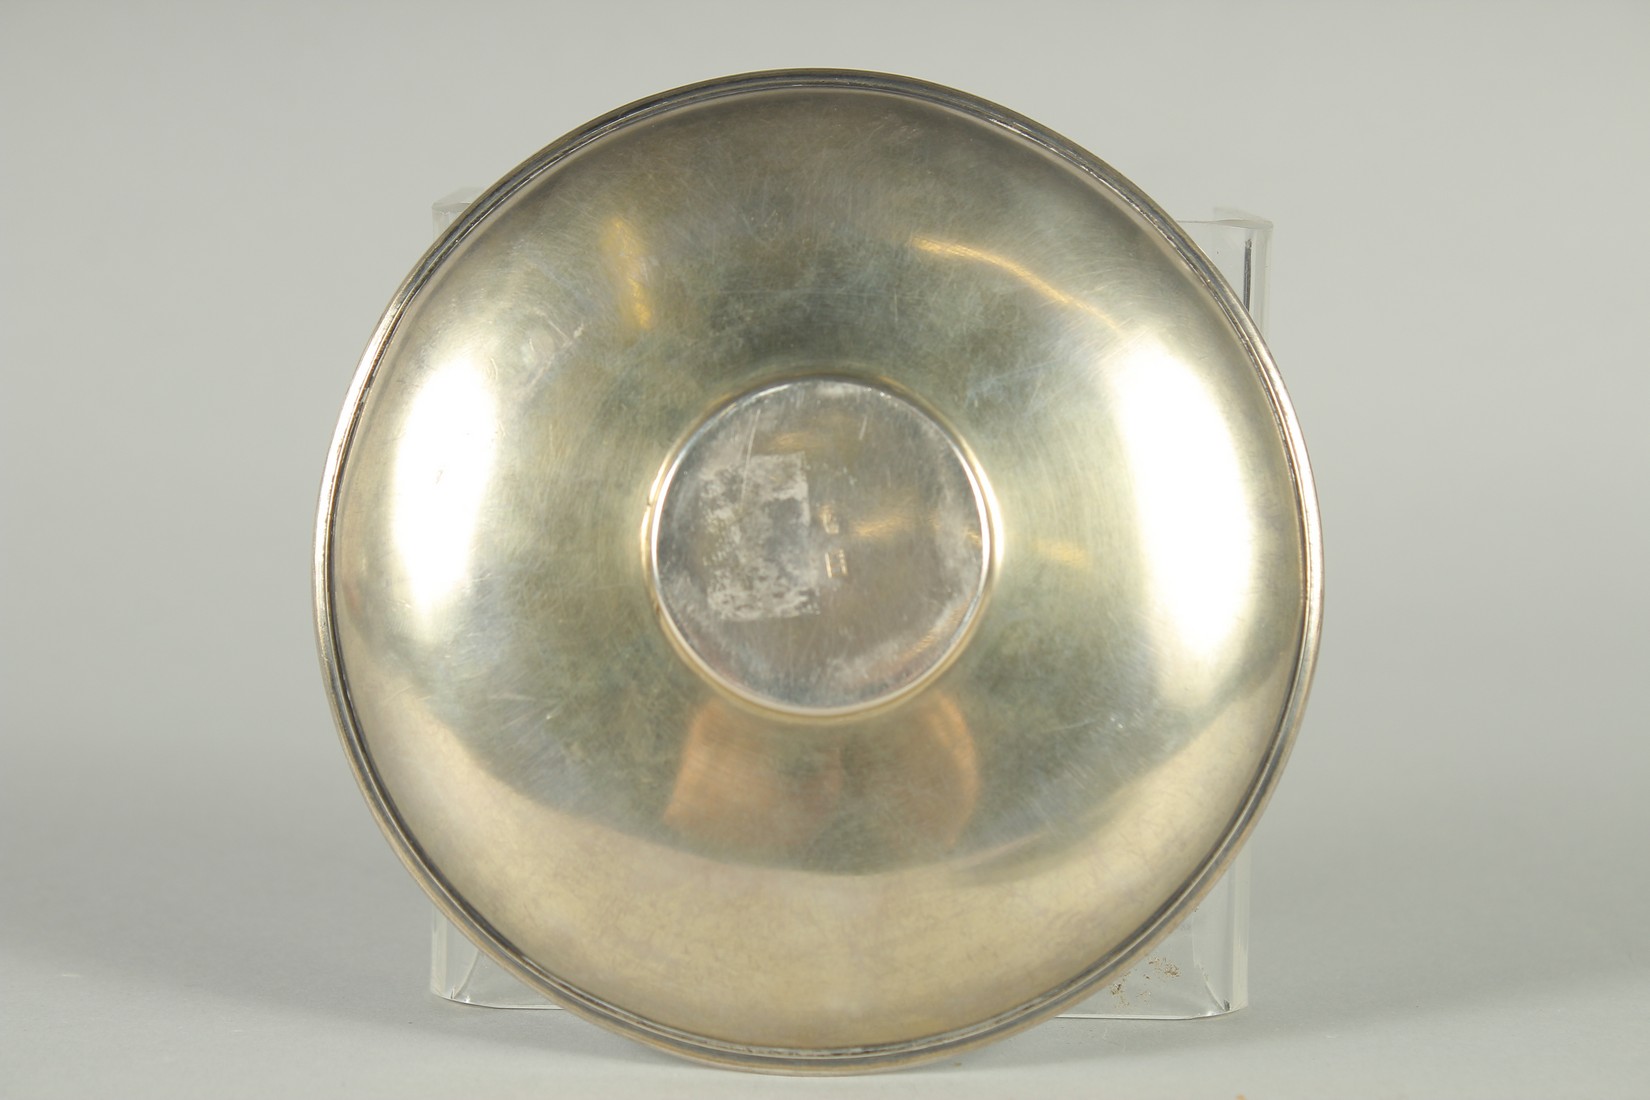 A RUSSIAN SILVER AND ENAMEL CIRCULAR SAUCER. 11.5cm diameter. Mark: Head A.F. Weight: 60gms. - Image 2 of 3